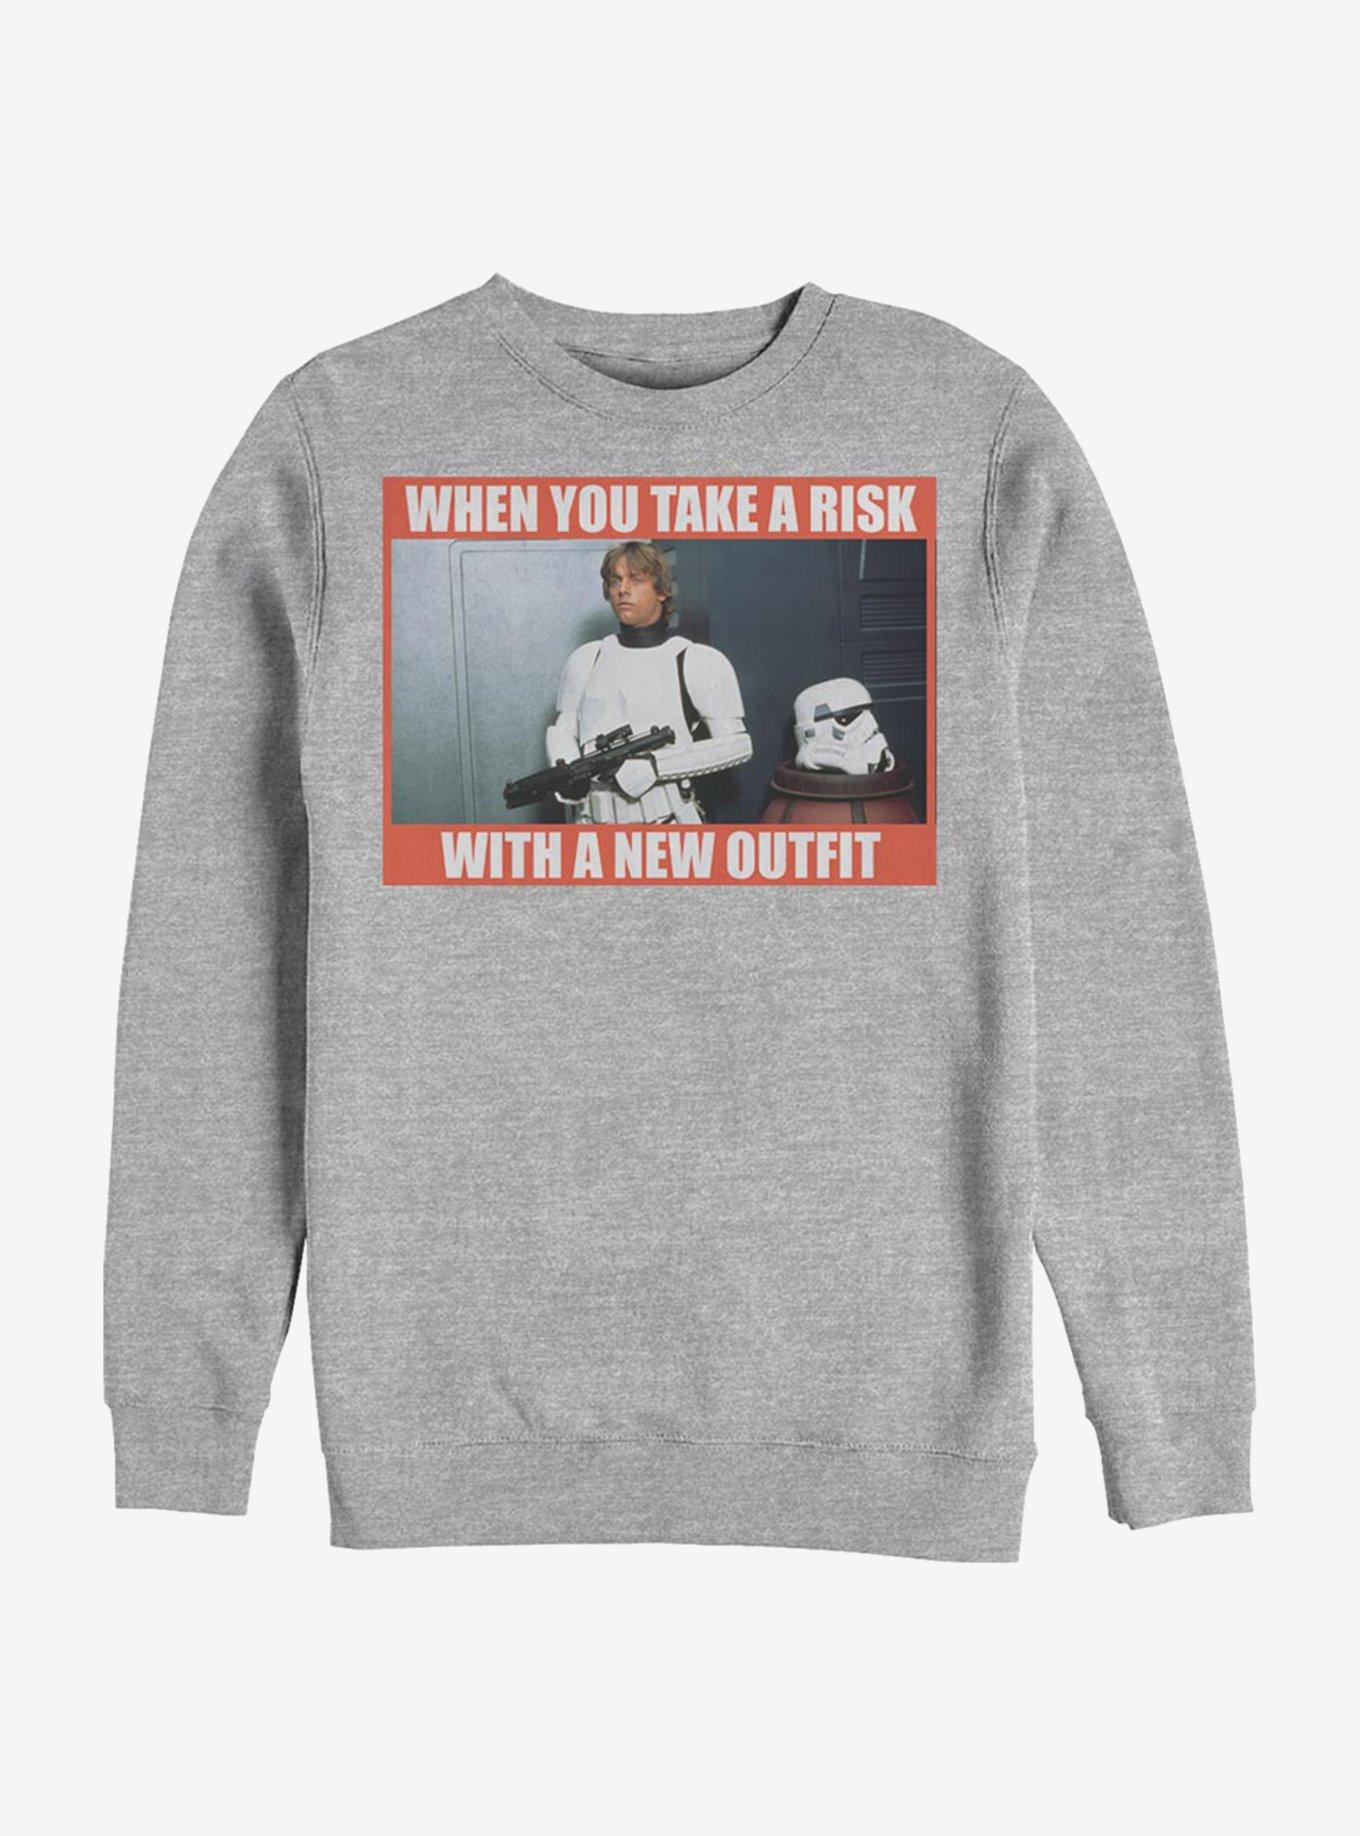 Star Wars New Outfit Crew Sweatshirt, ATH HTR, hi-res